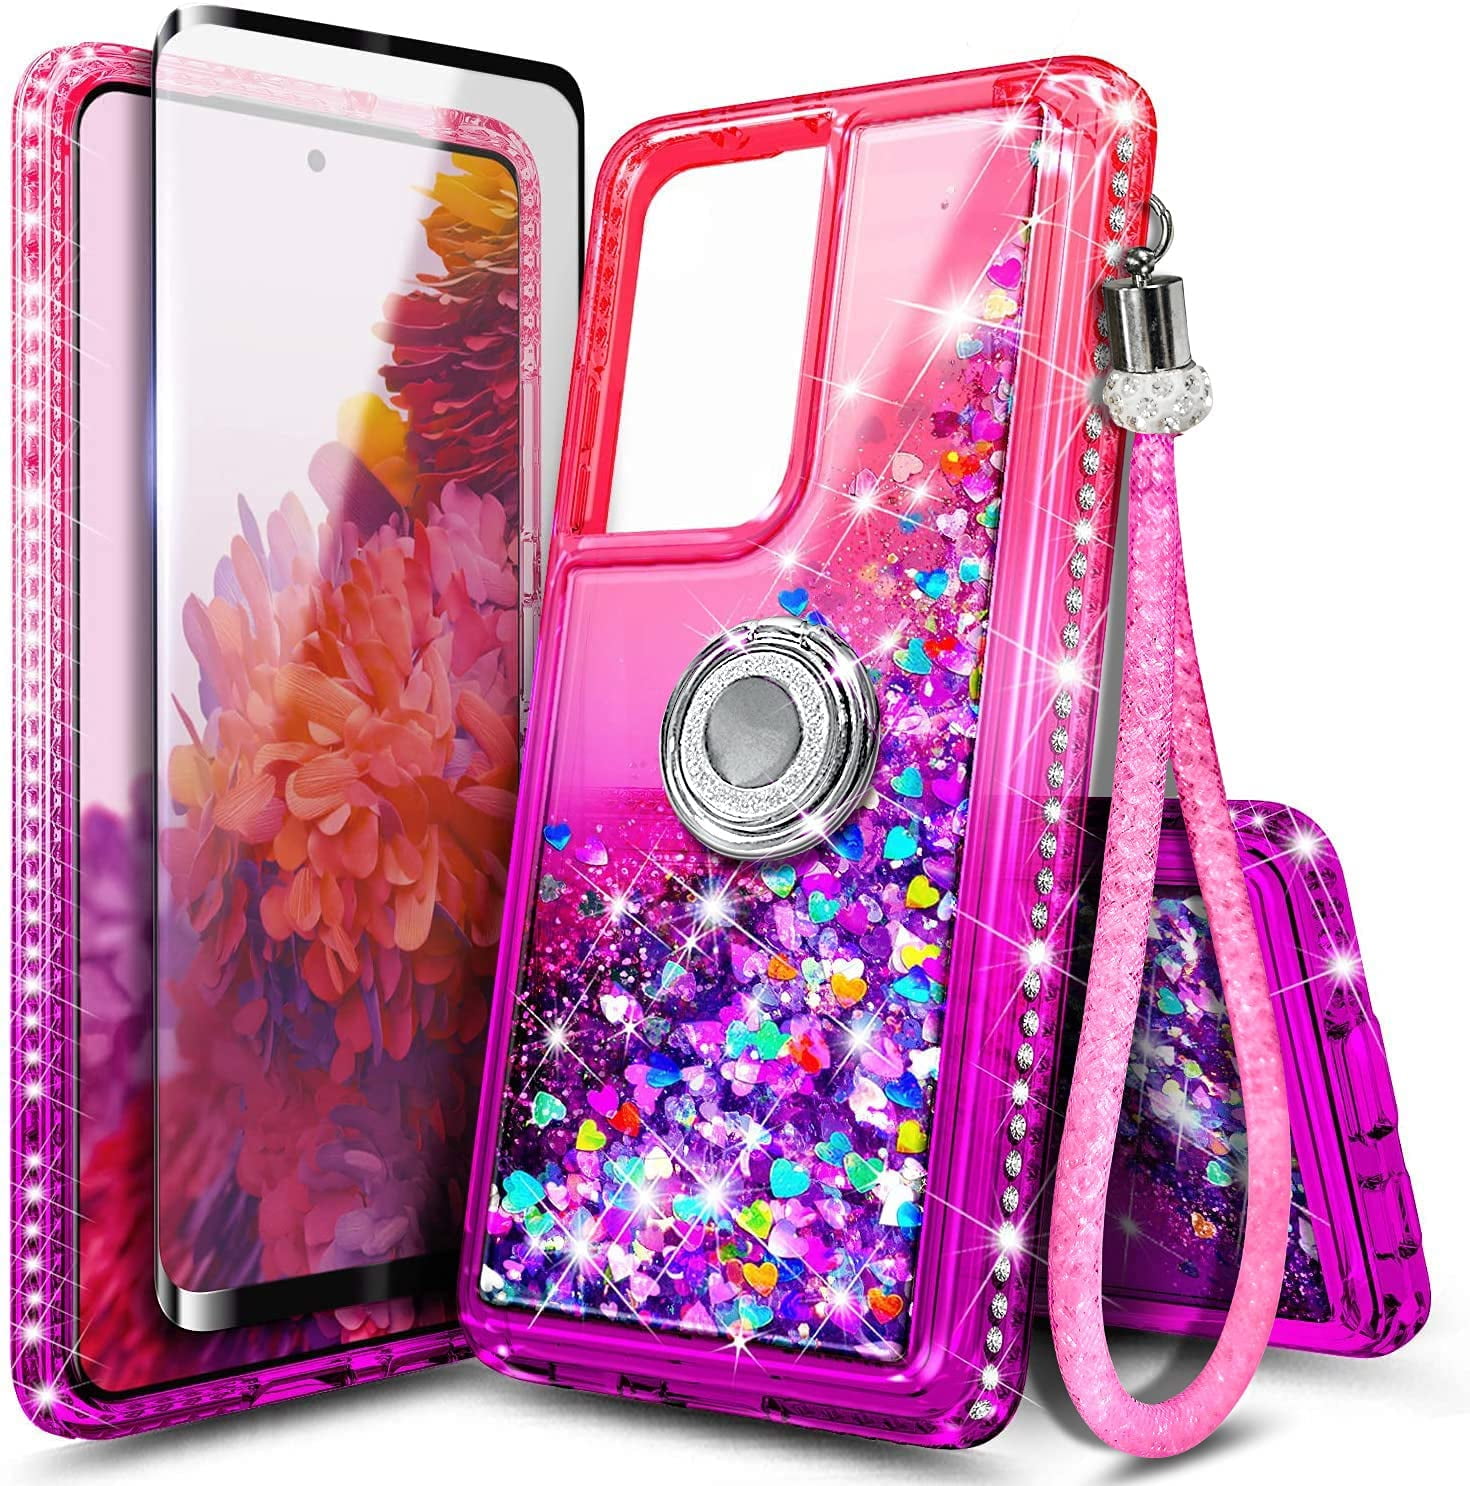  Lastma for Samsung Galaxy S21 Case 6.2 [NOT Plus] Cute with  Wrist Strap Kickstand 5G Glitter Bling Cartoon IMD Soft TPU Shockproof  Protective Phone Cases Cover for Girls and Women 